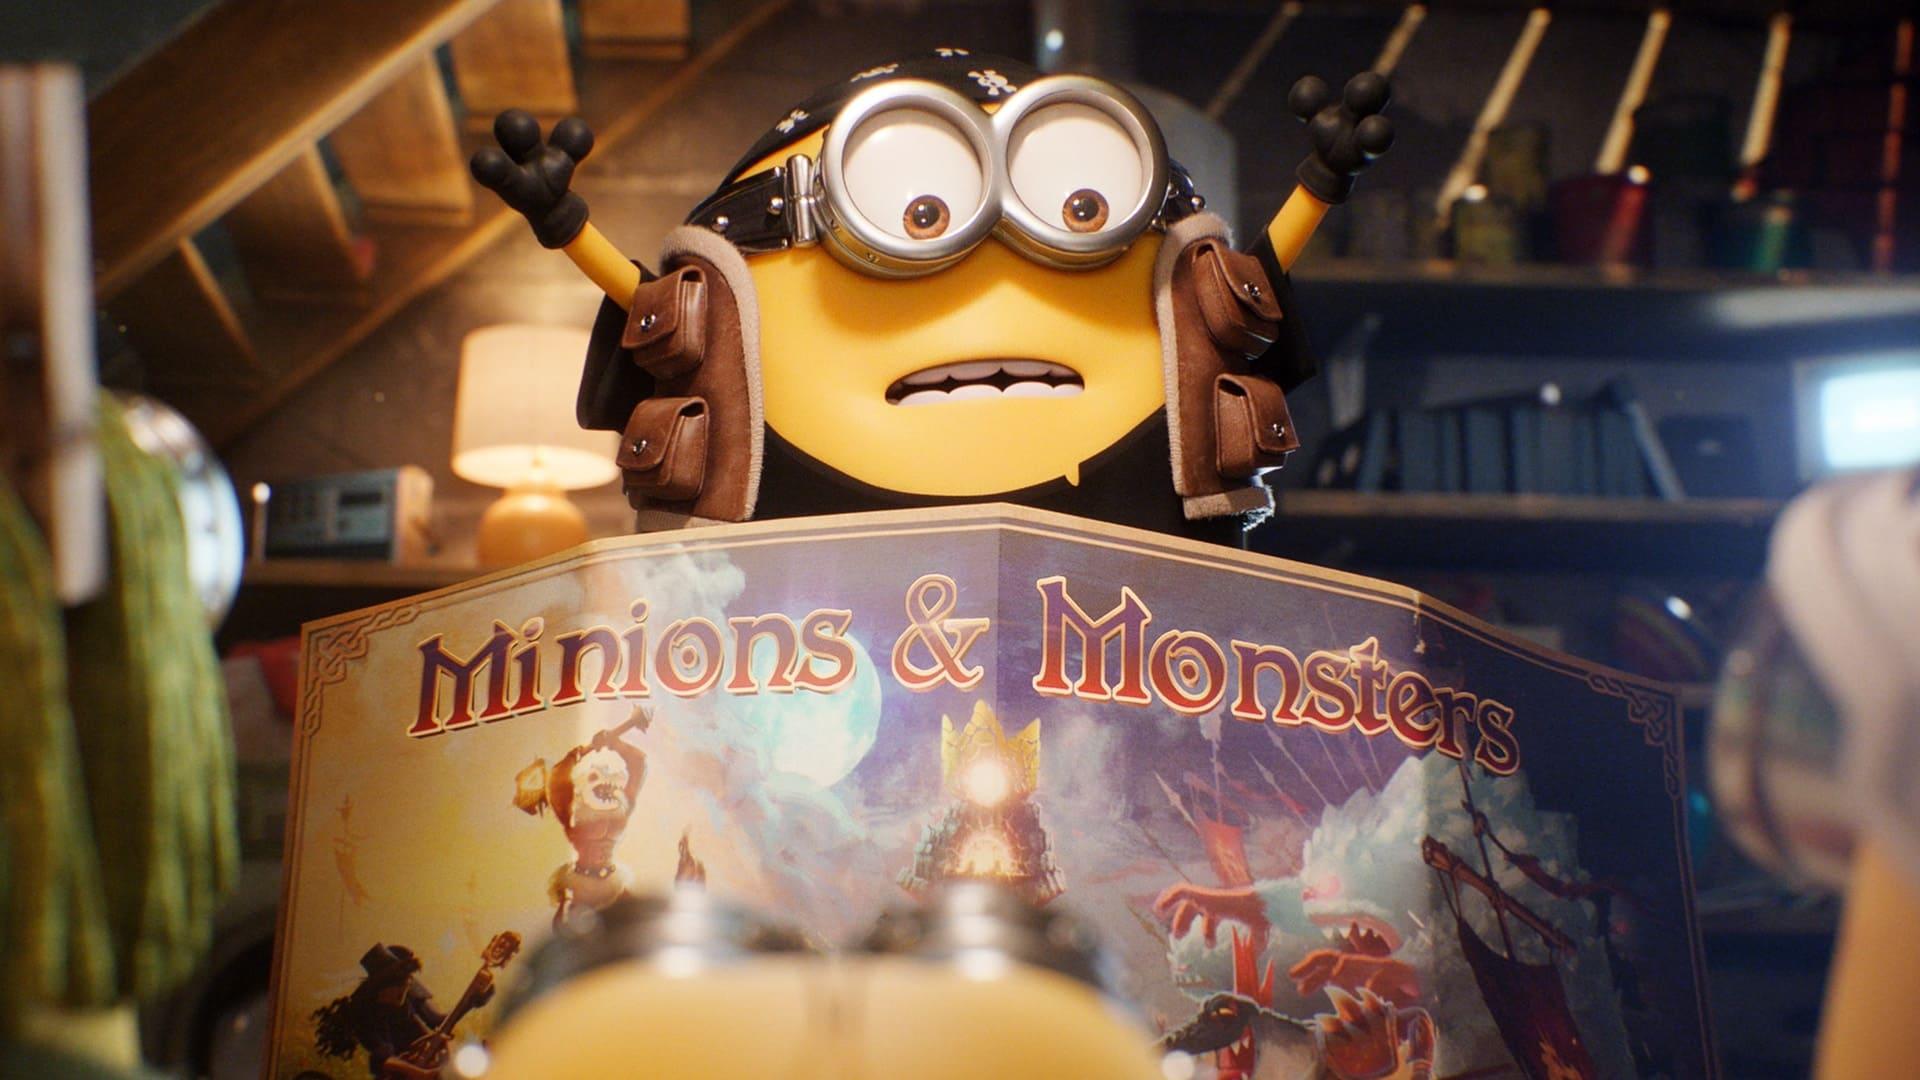 Minions & Monsters backdrop